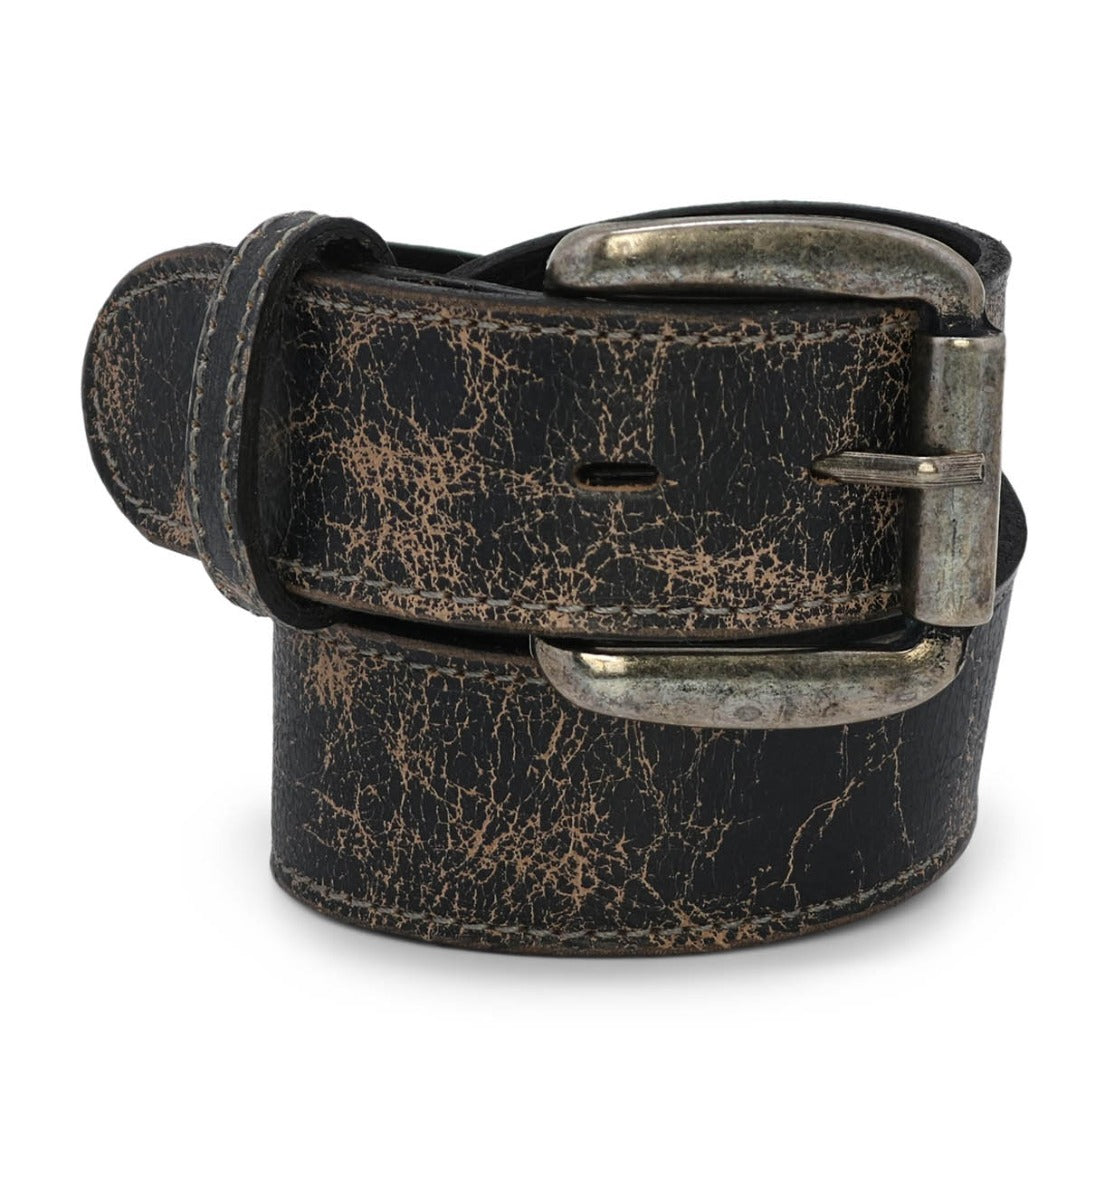 A worn-out Meander black leather belt with a distressed texture and an antique metal buckle, isolated on a white background.